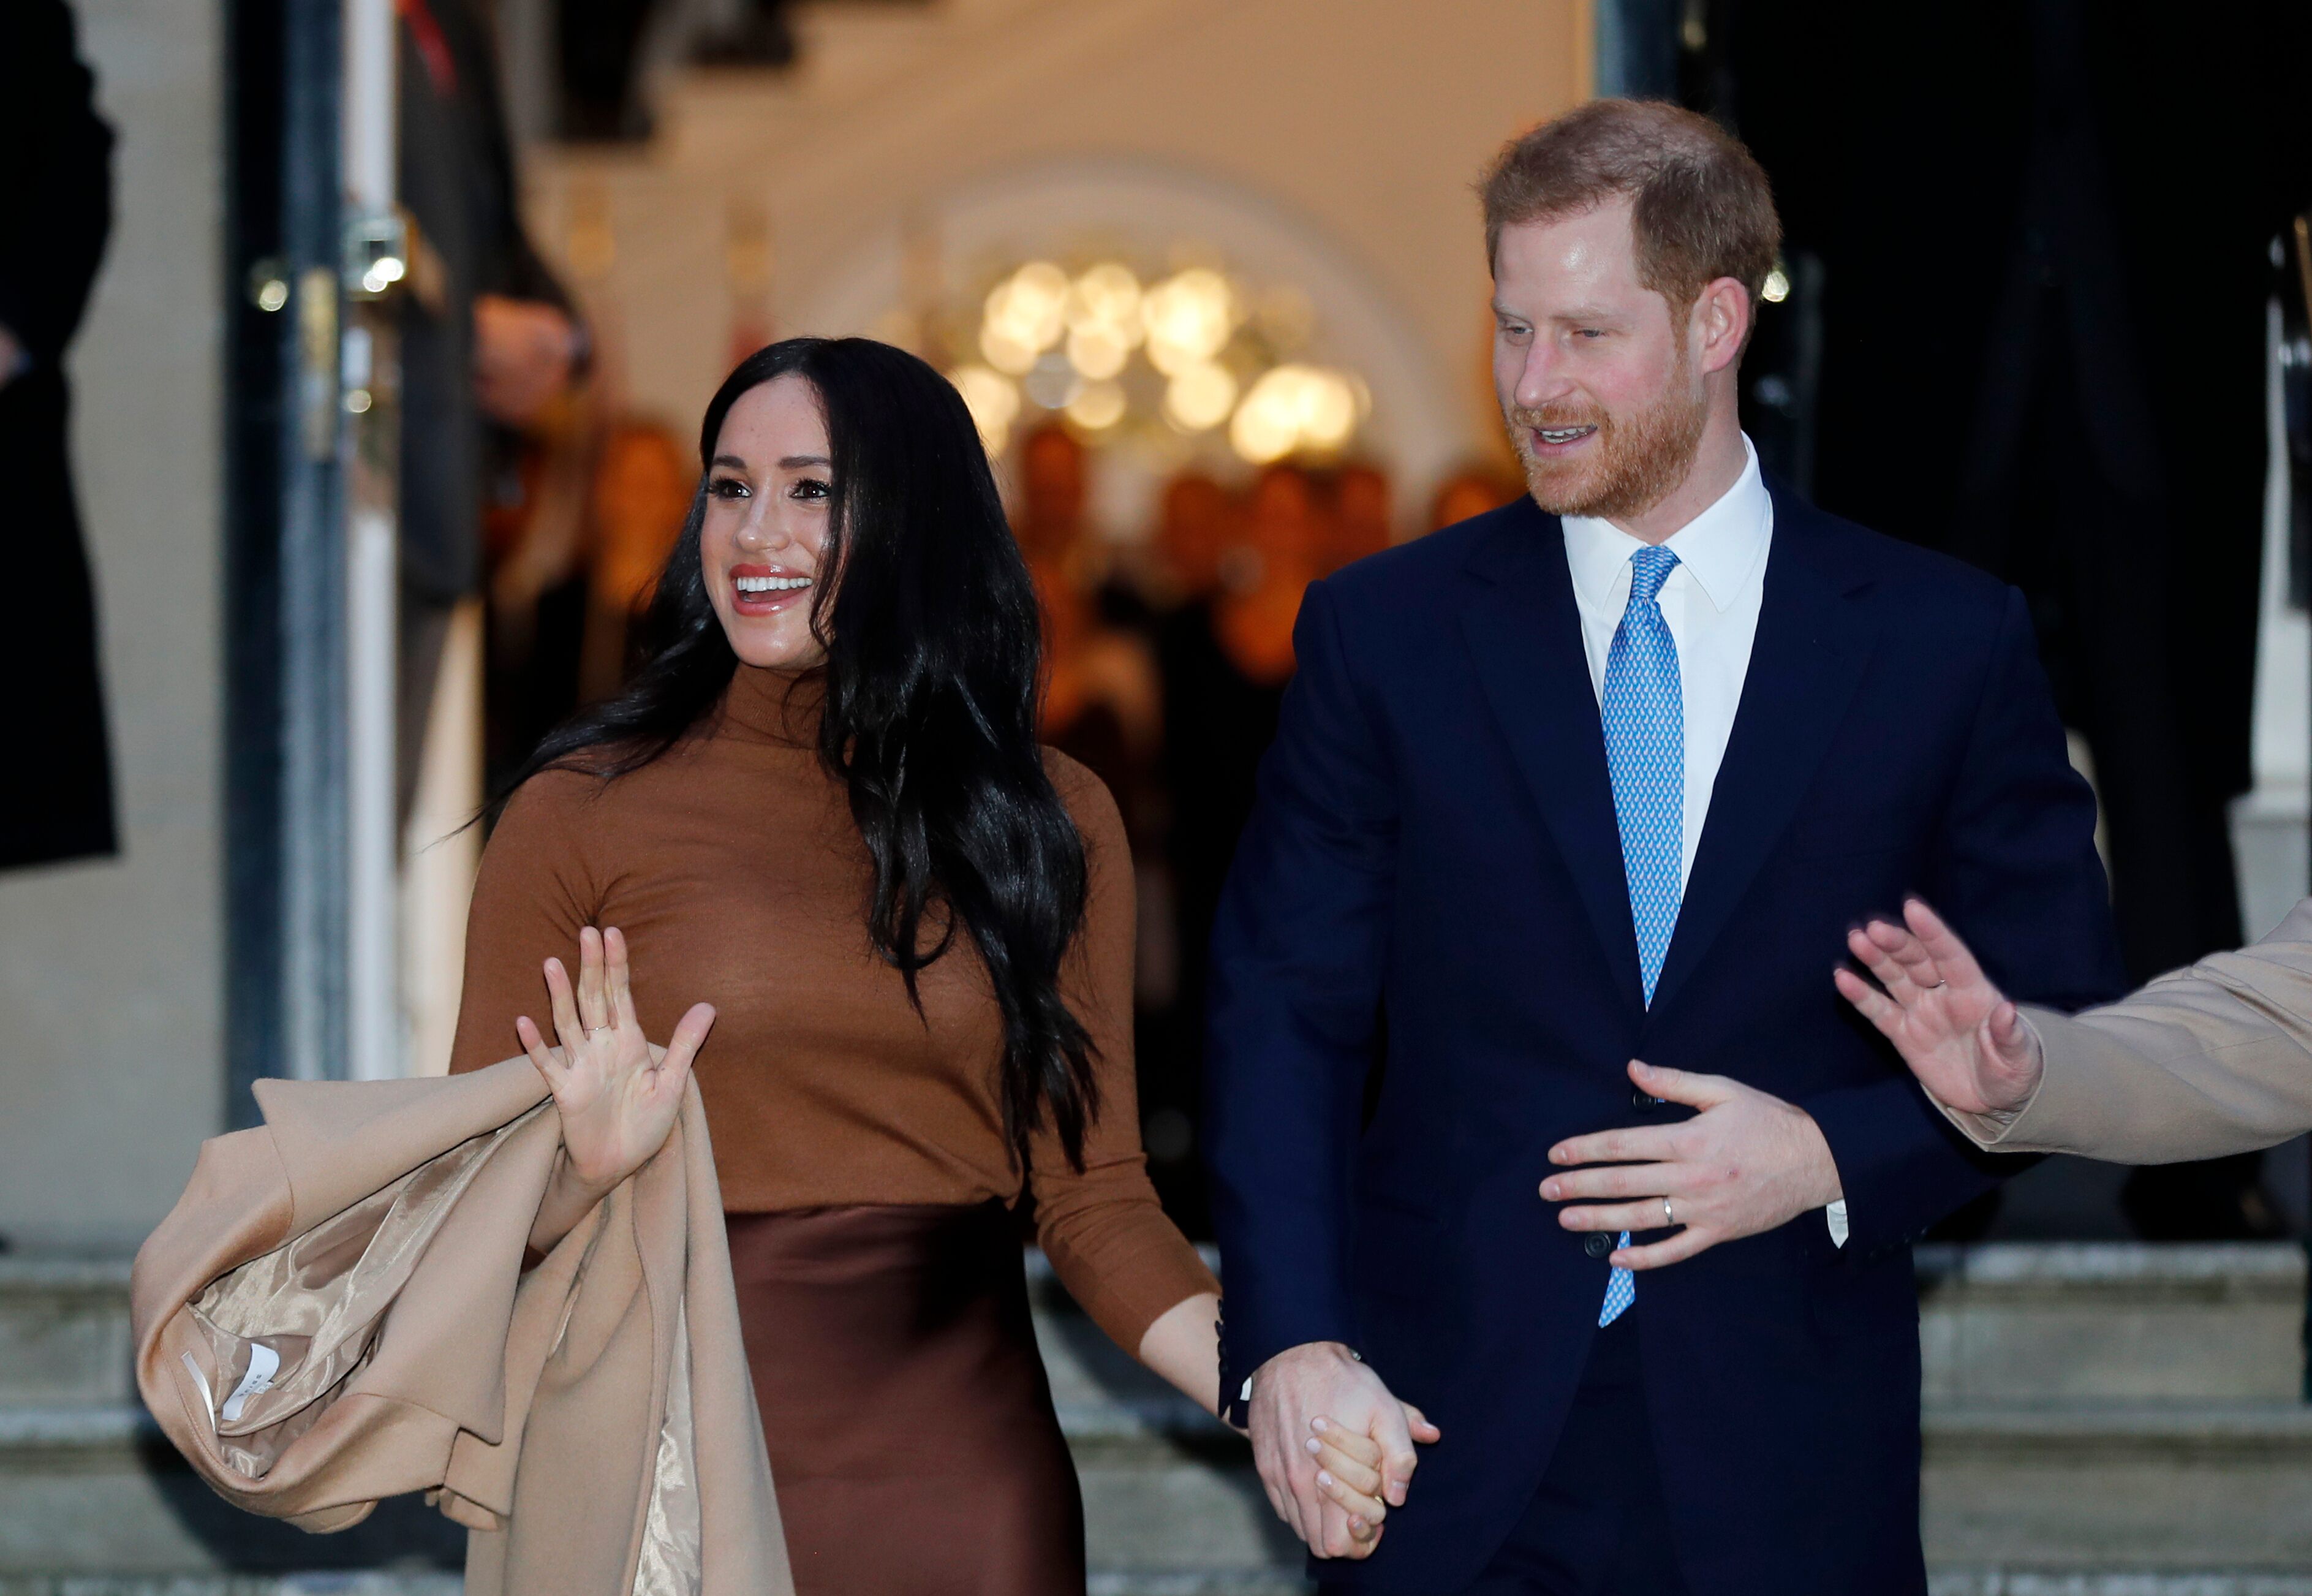 Buckingham Palace responds to Meghan Markle, Prince Harry's exit: 'These are complicated issues' - www.foxnews.com - Britain